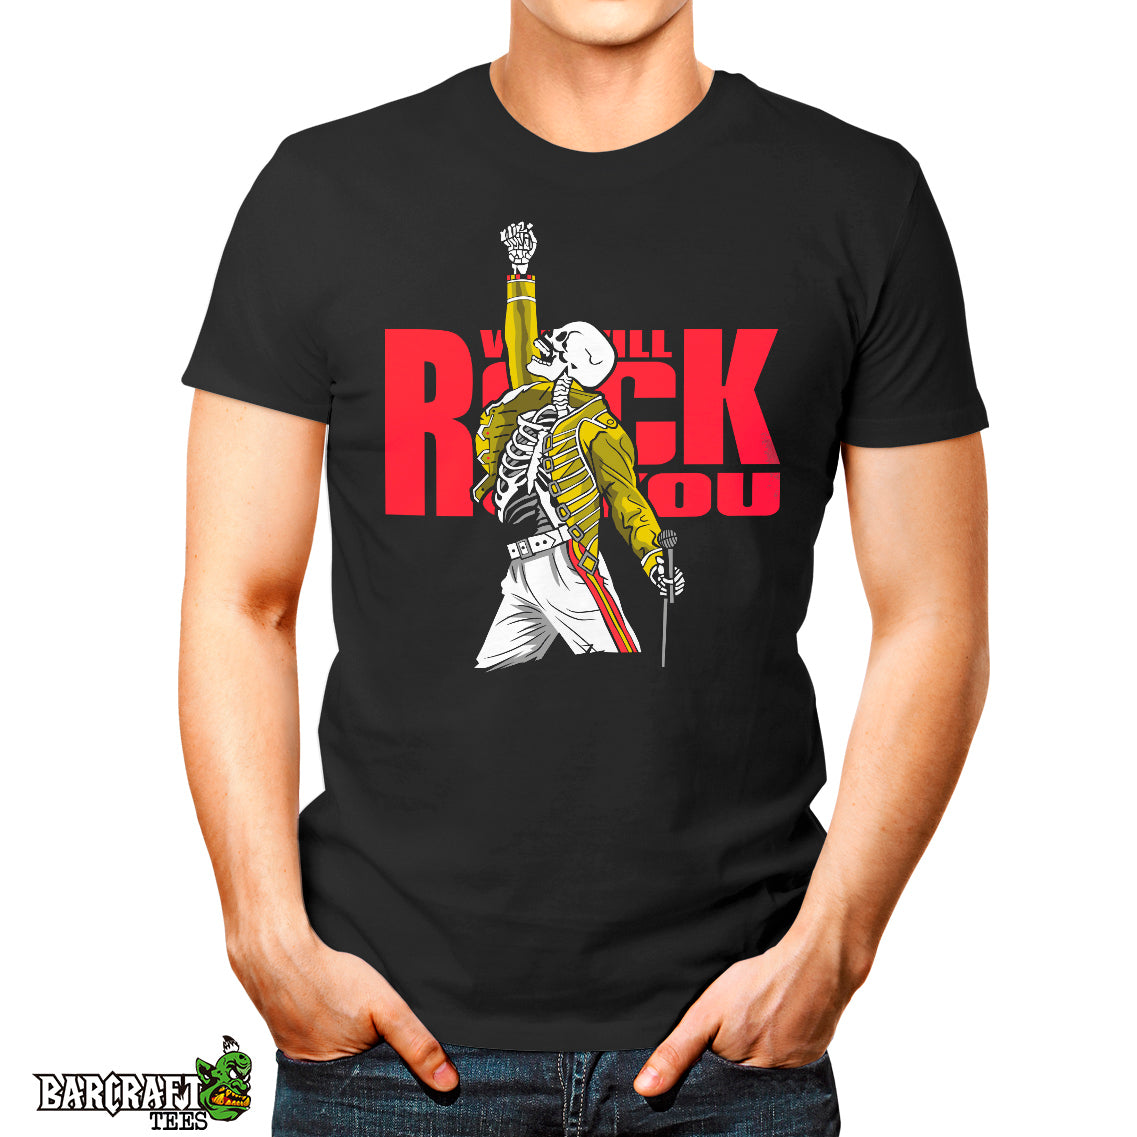 Will rock you